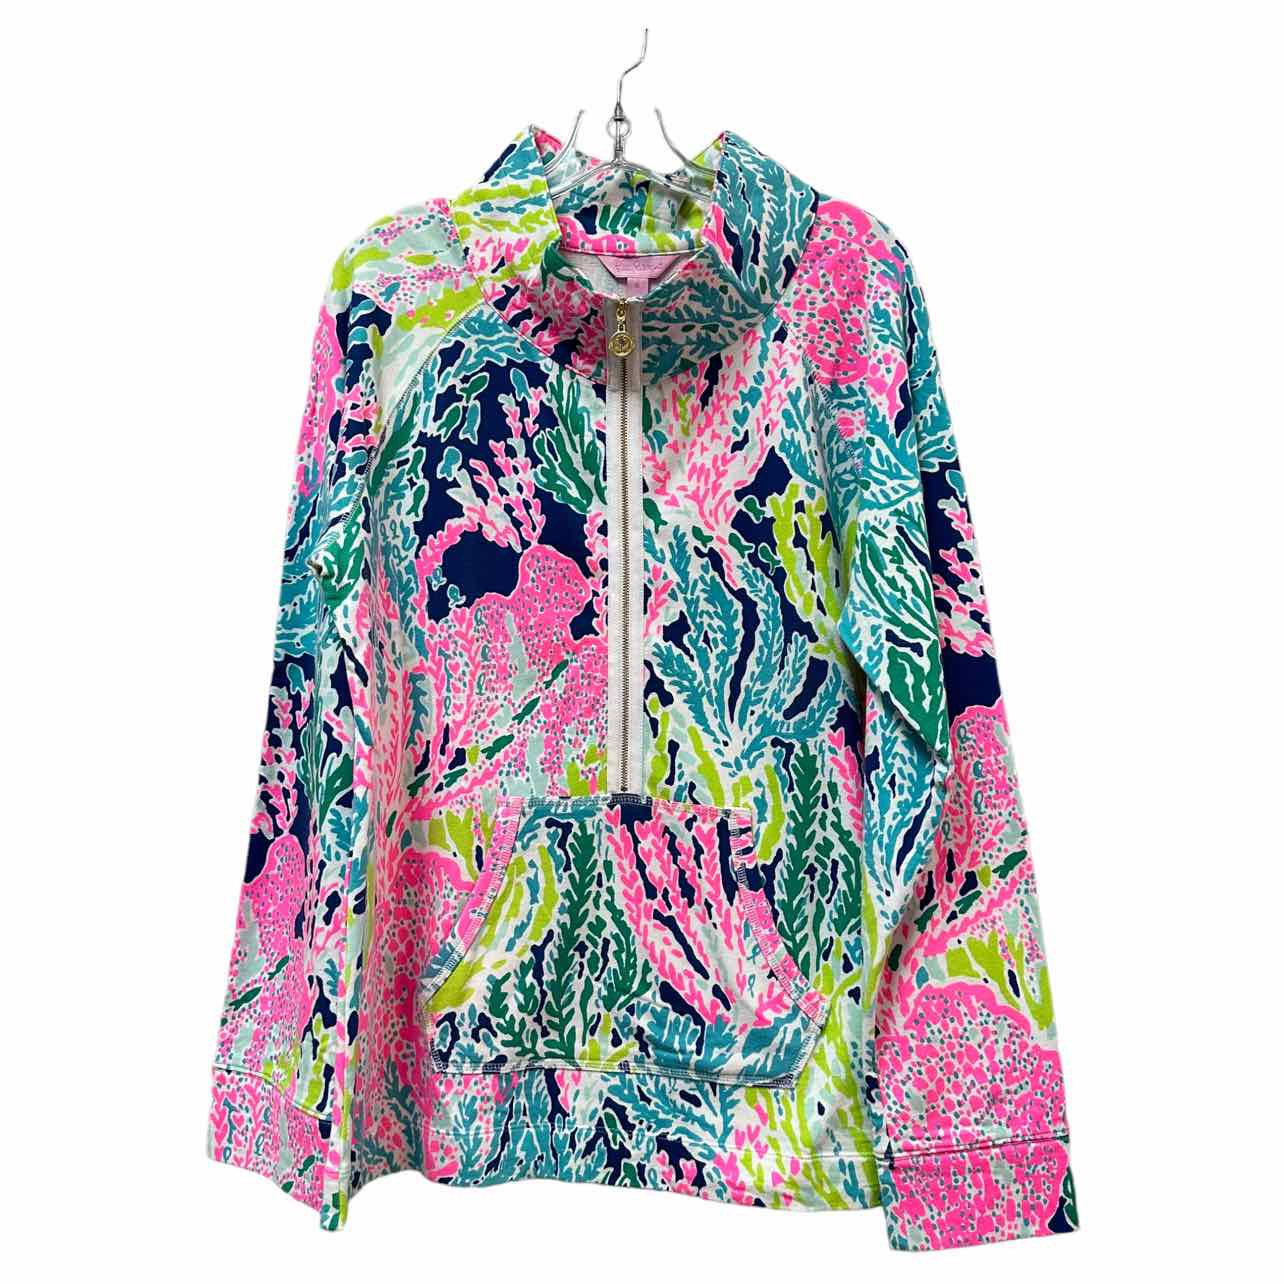 Lilly Pulitzer Athletic Jacket